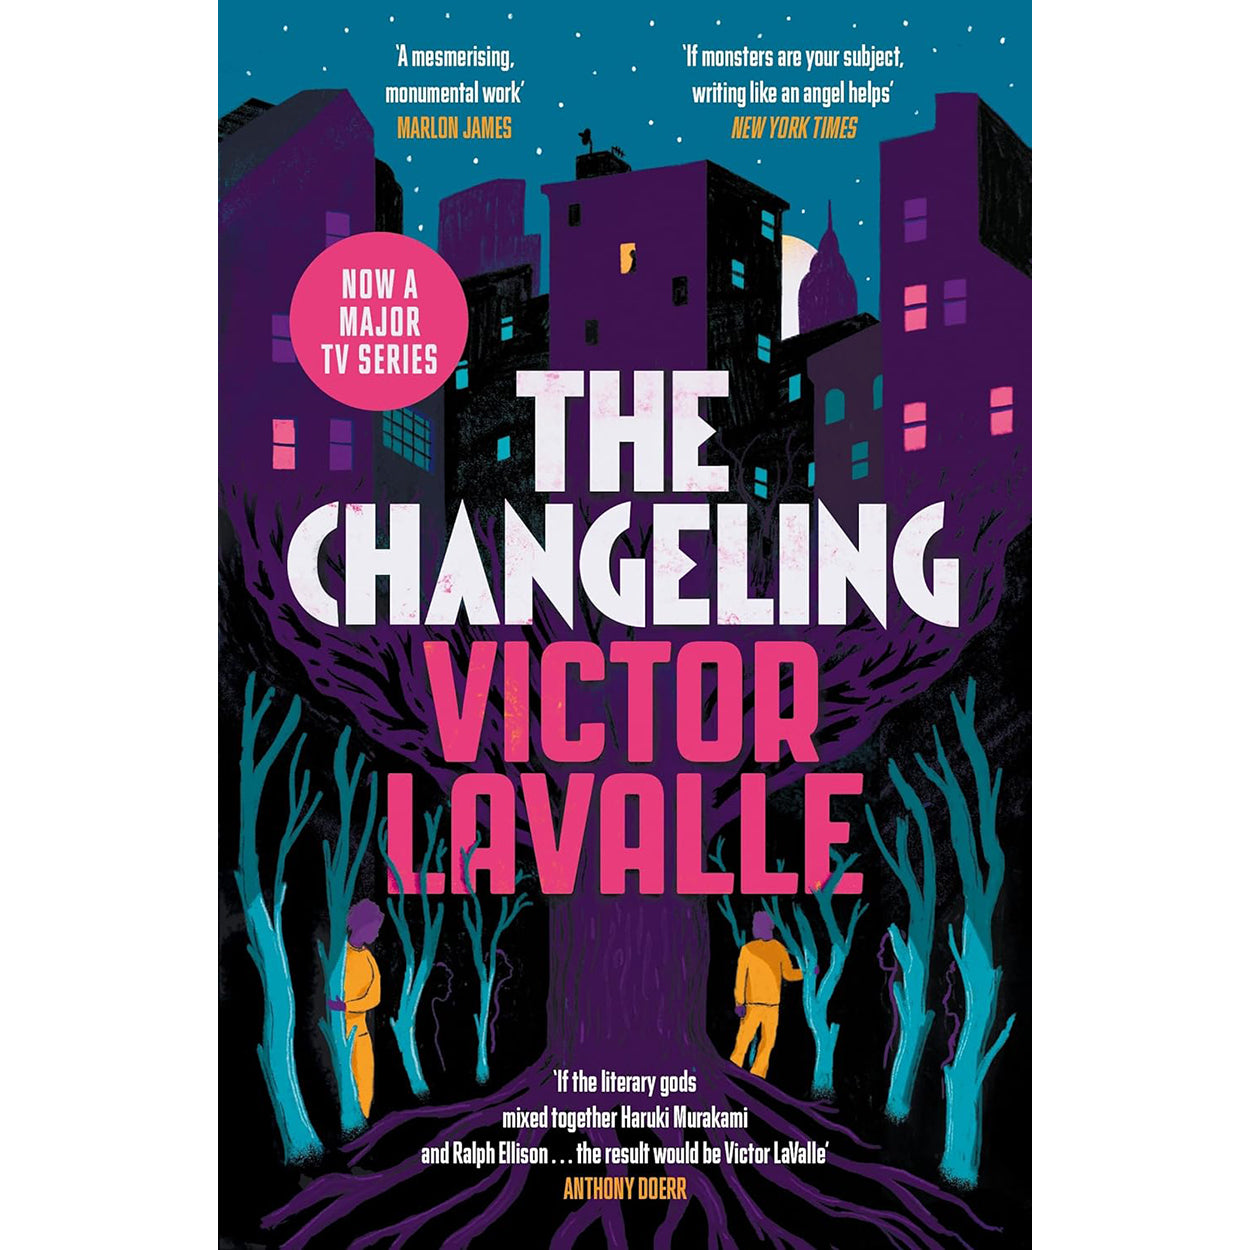 The Changeling Front Cover (Paperback)